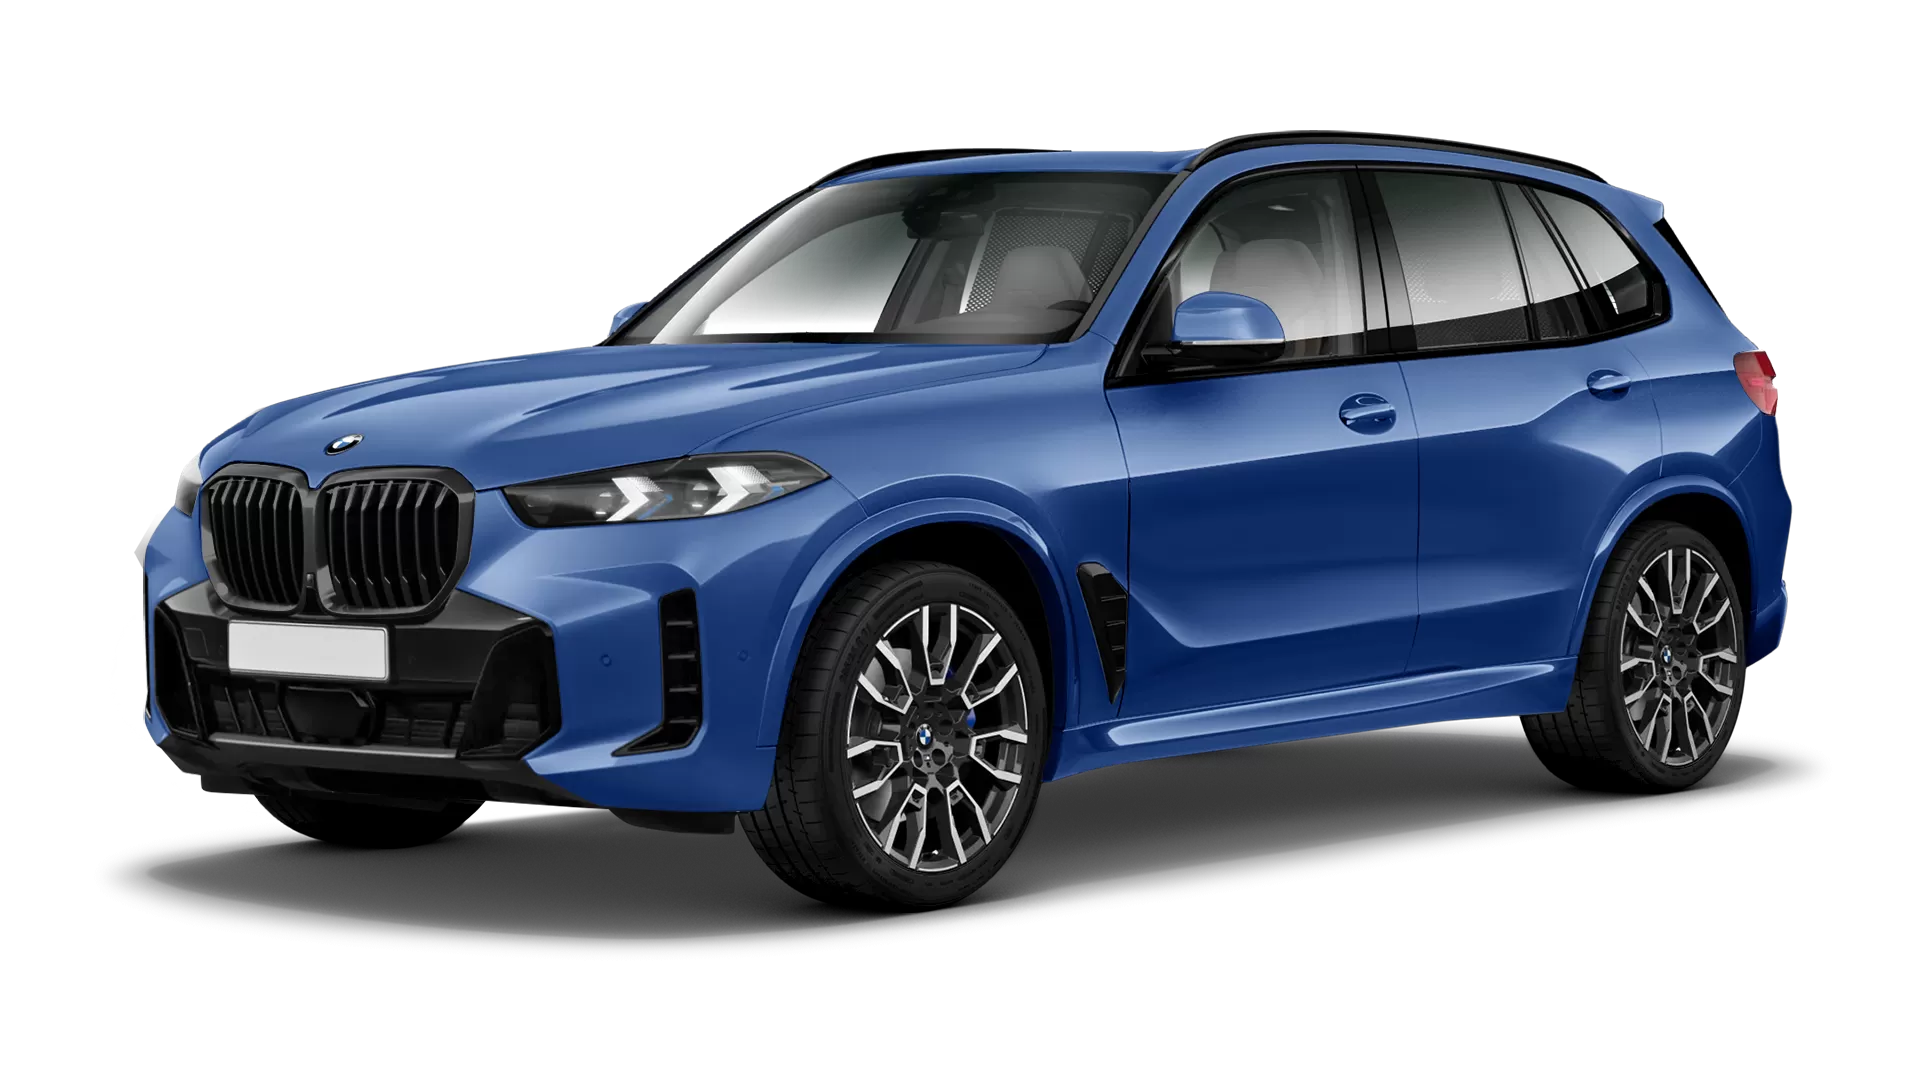 BMW X5 G05 LCI Facelift stock front view in Marina Bay Blue color